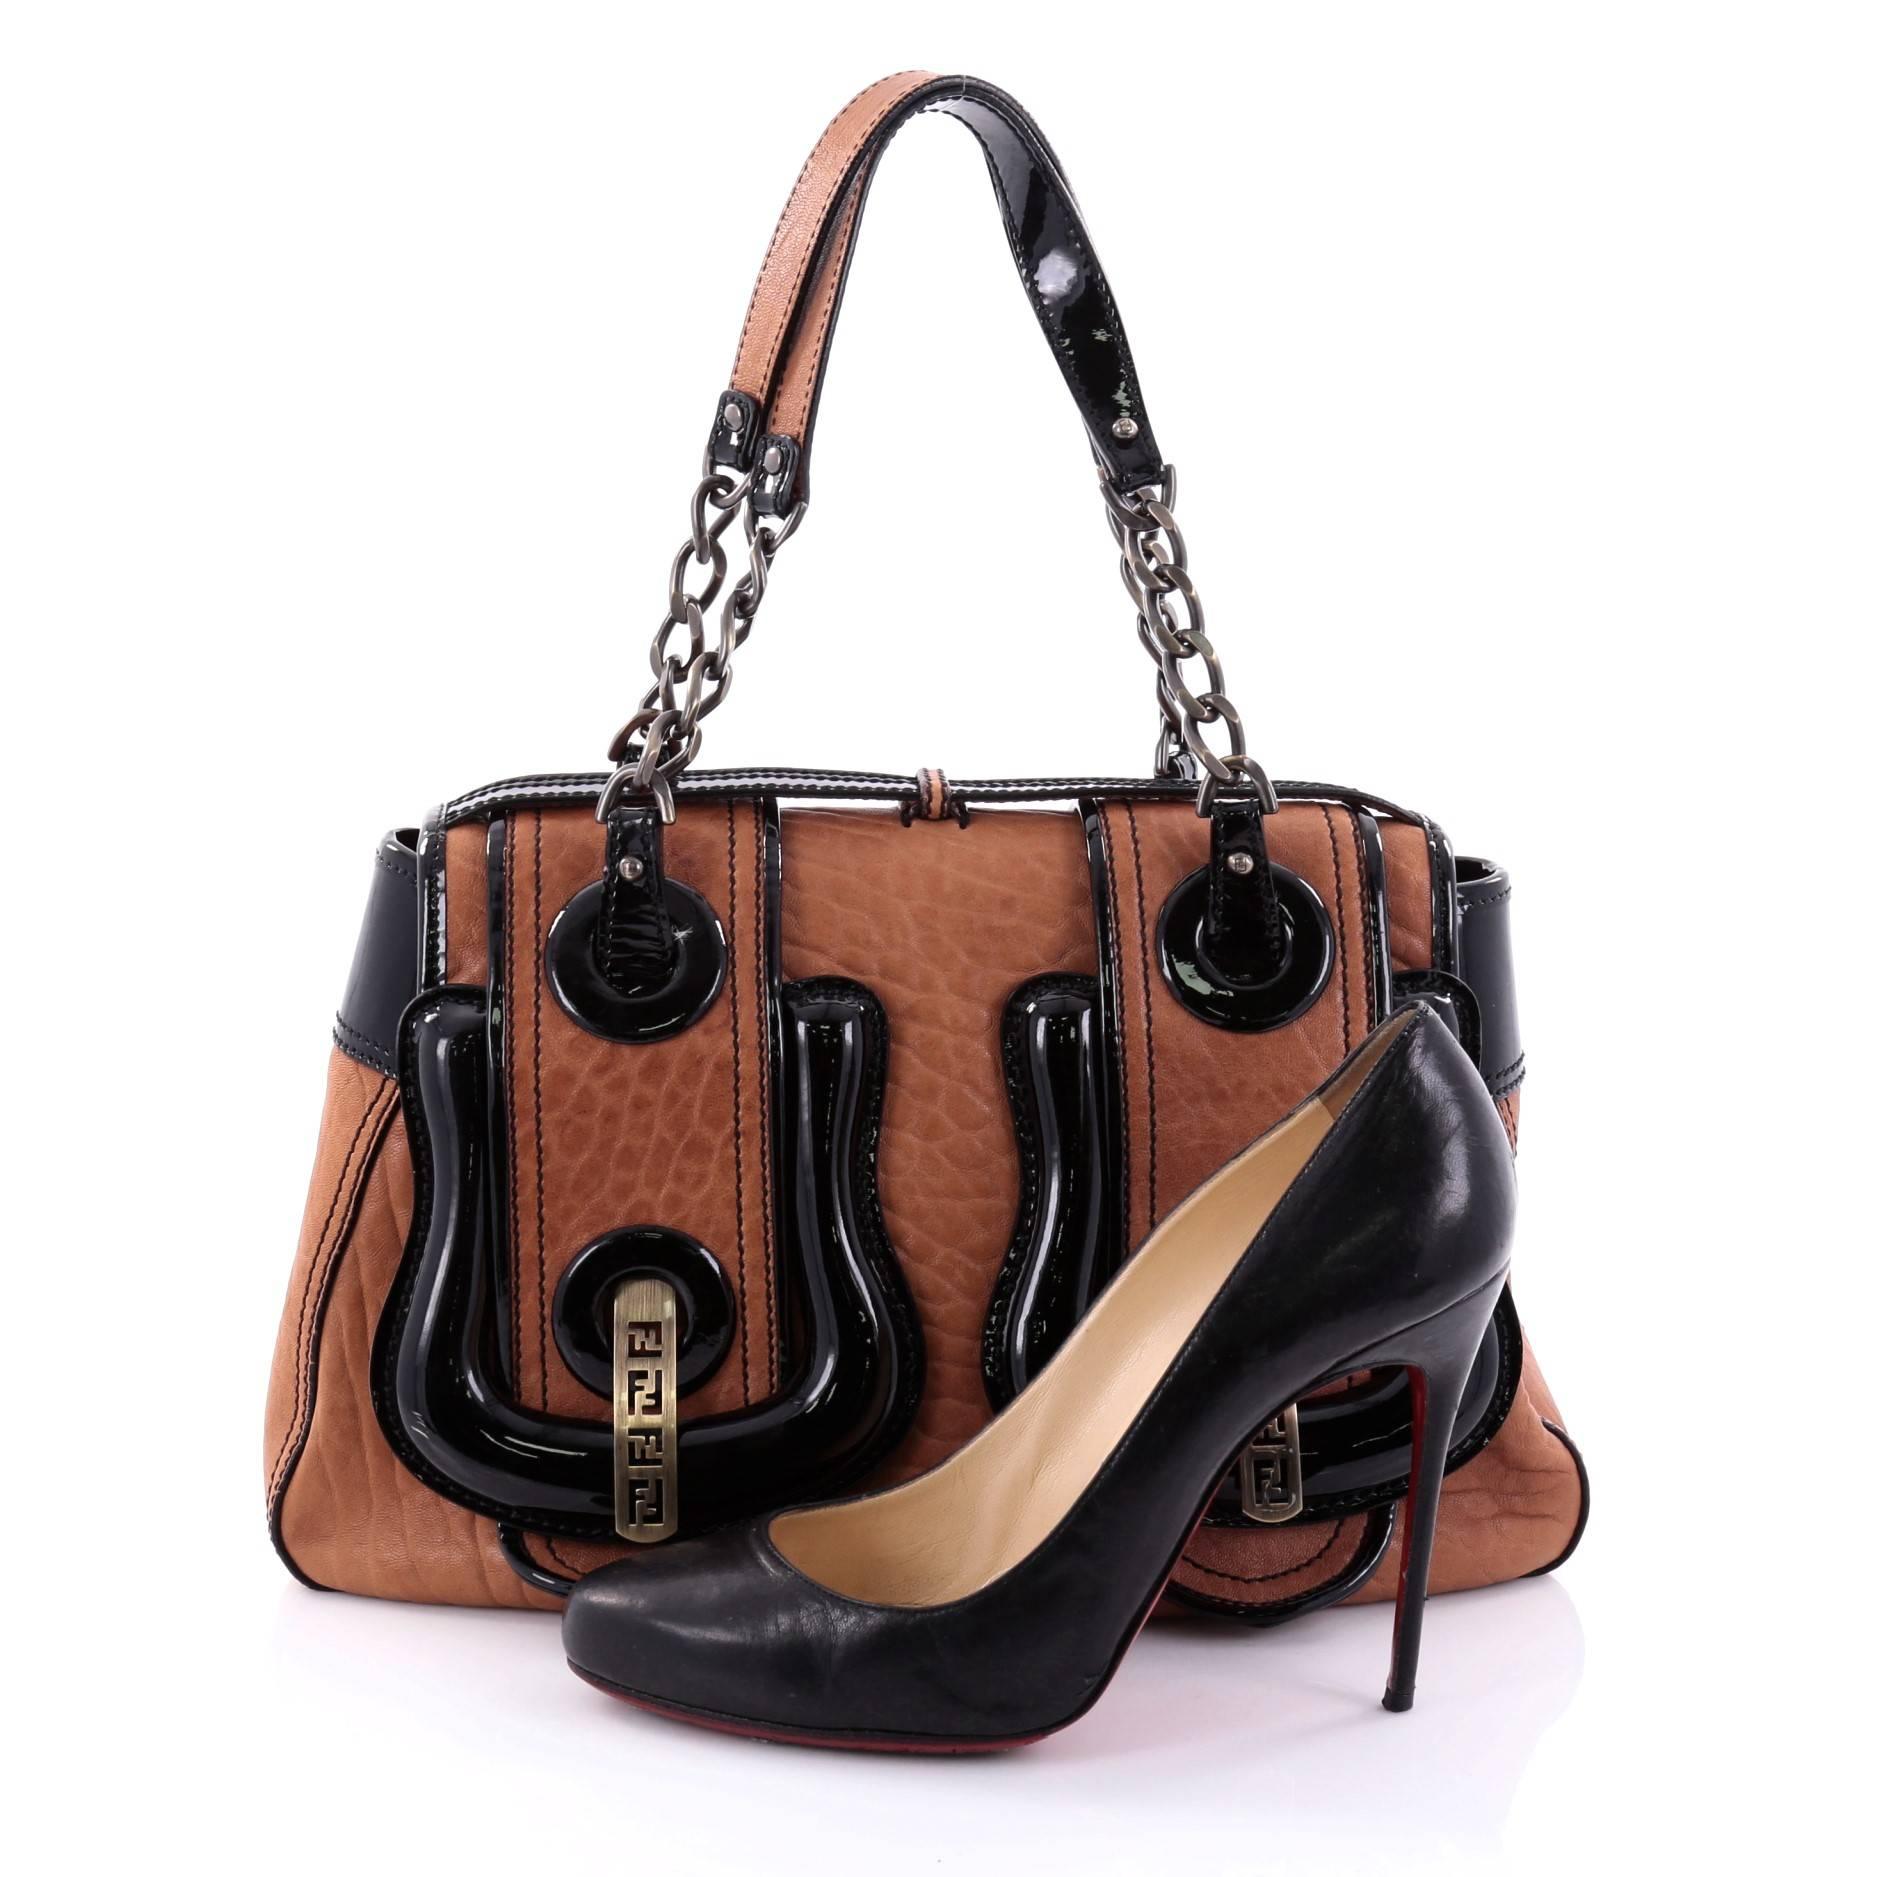 This authentic Fendi B. Bag Leather Medium is a chic bag with a roomy construction that is ideal for work and everyday use. Crafted from light brown leather with black patent leather accents, this bag features oversized buckle details with aged